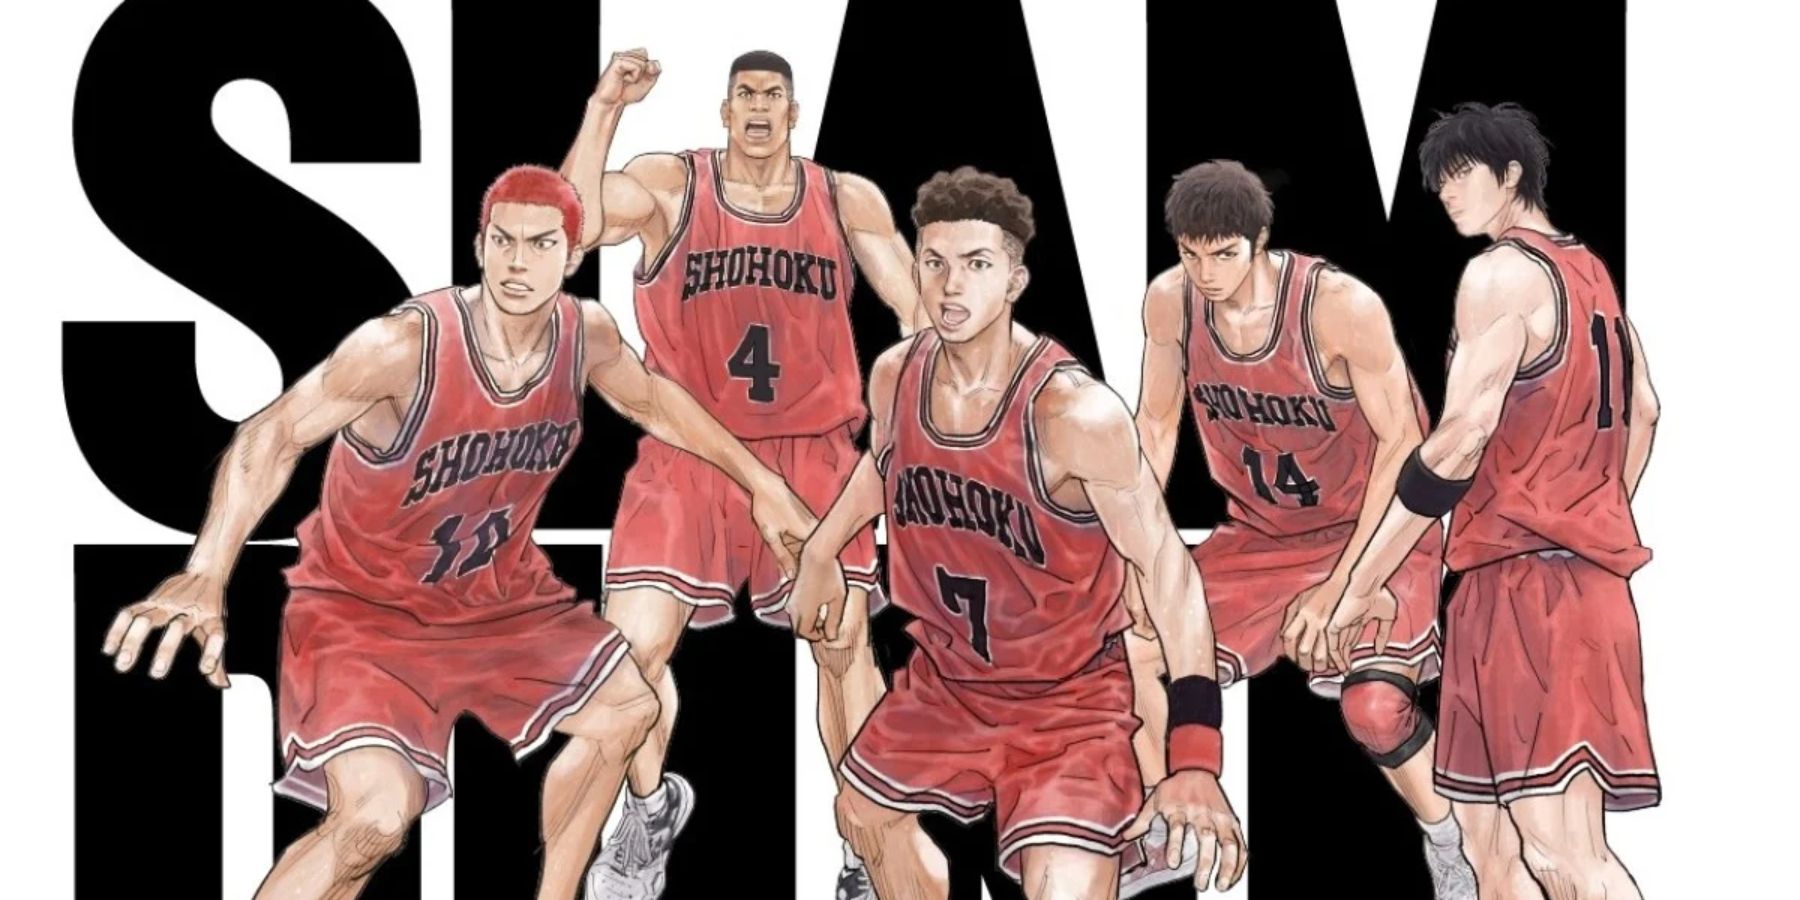 The First Slam Dunk anime movie poster with complete starting five